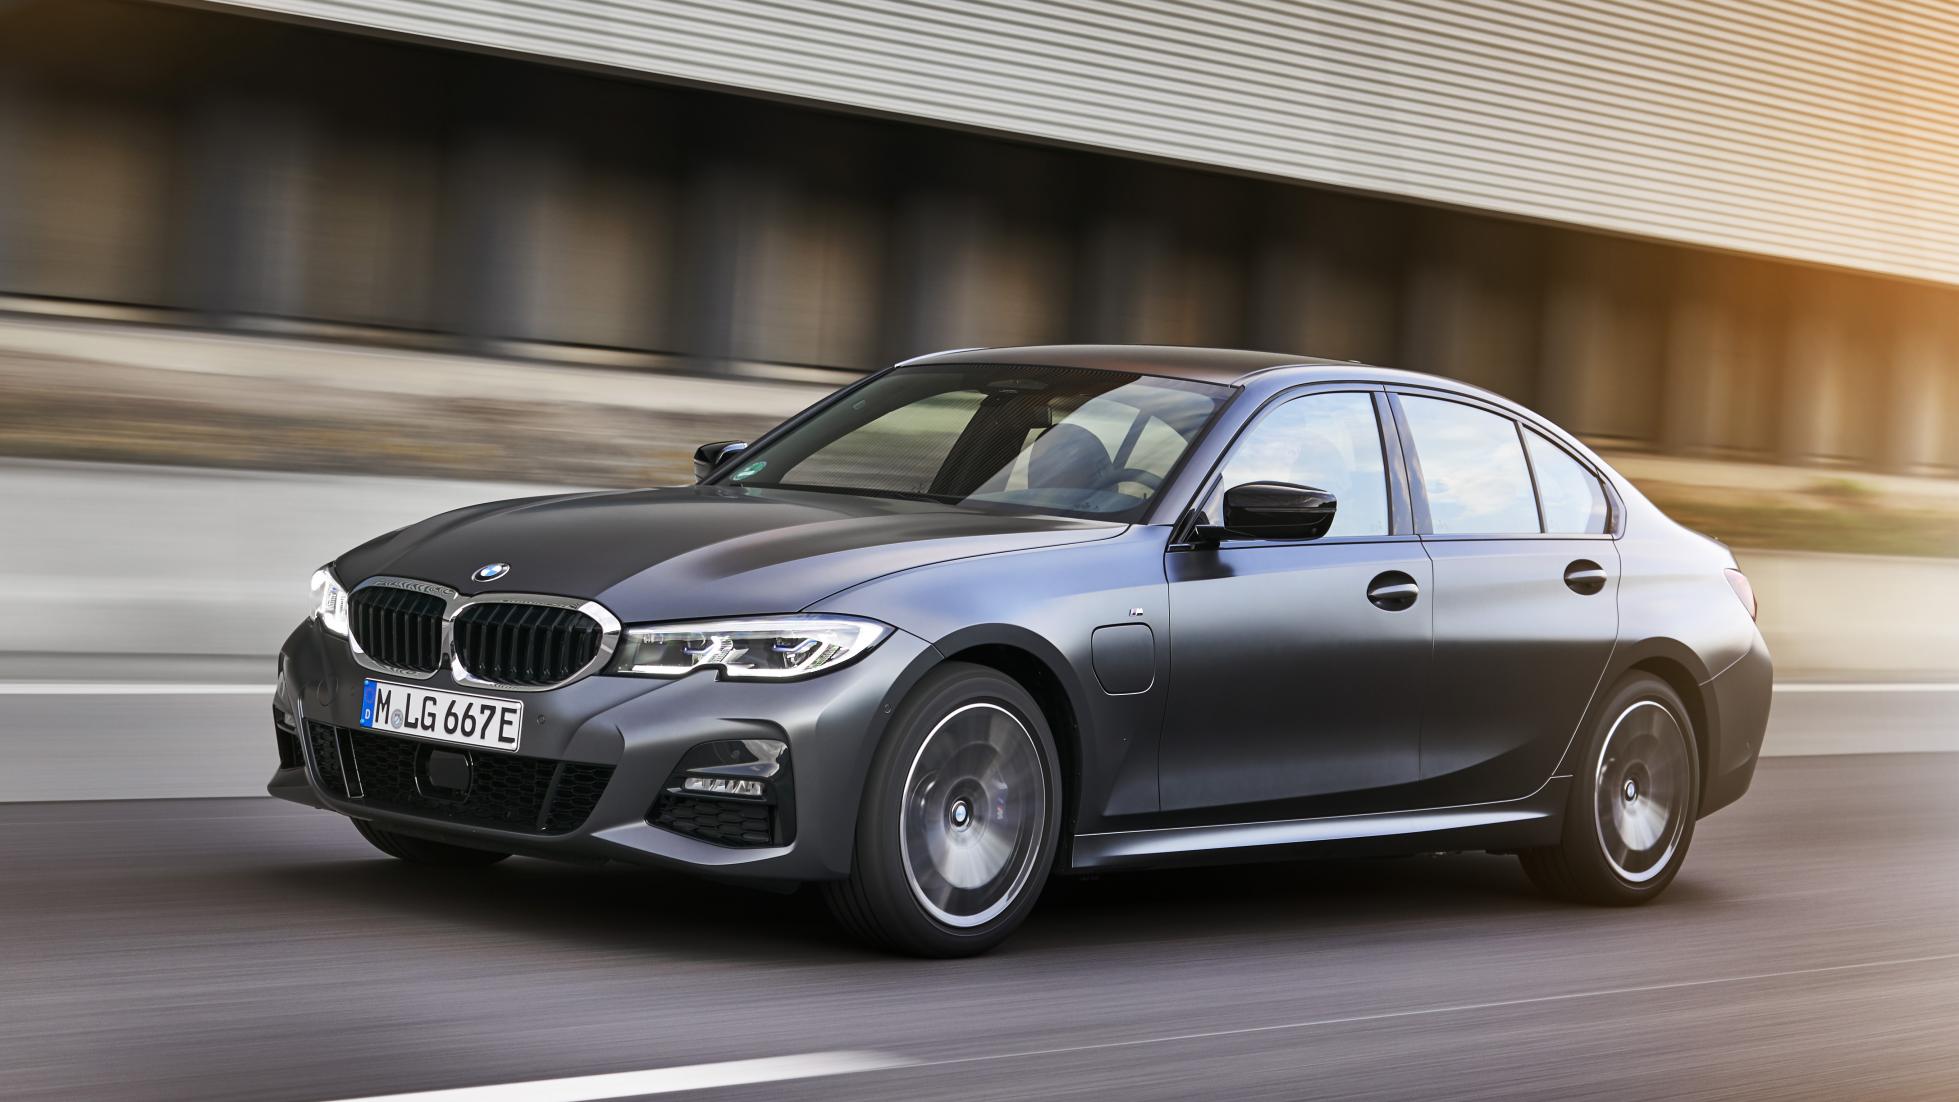 TopGear | BMW 330e review: plug-in hybrid 3 Series driven